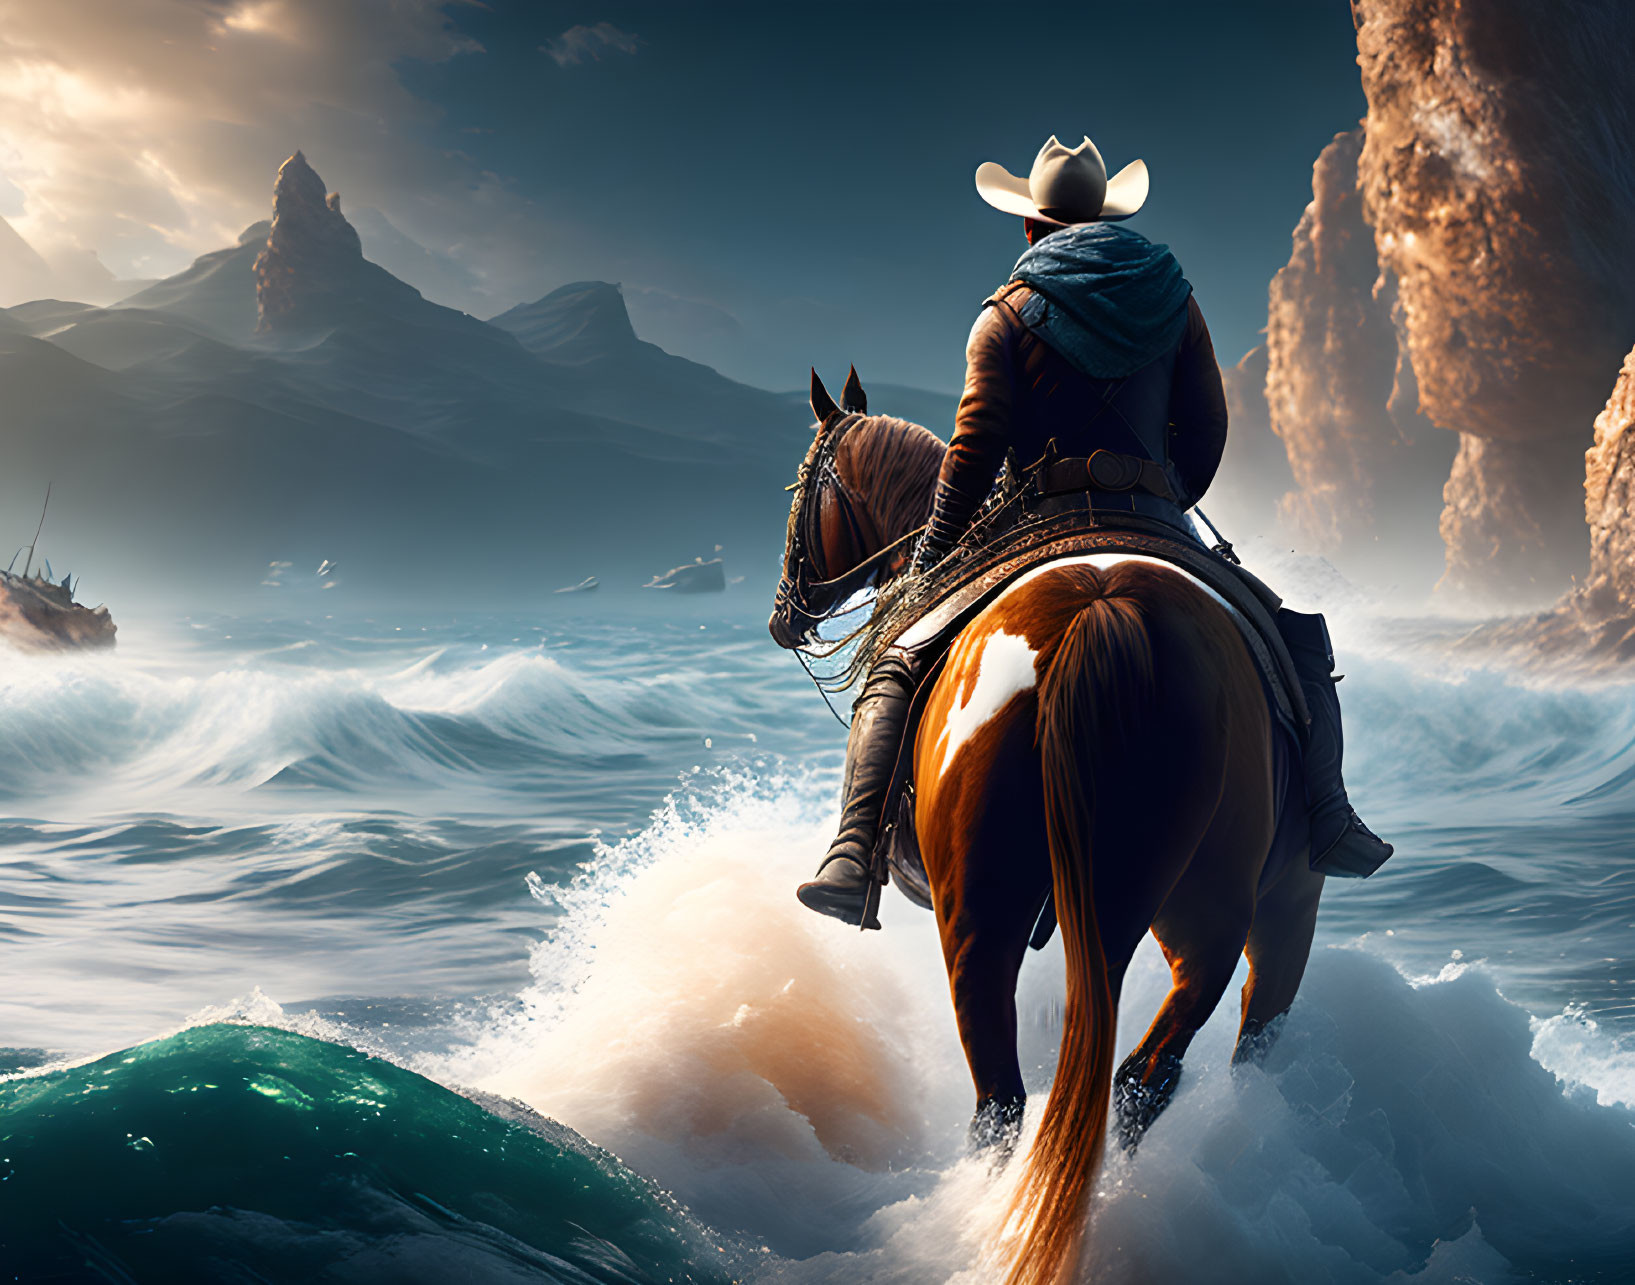 Cowboy on horseback amidst ocean waves, rocky cliffs, shipwreck, and stormy sky